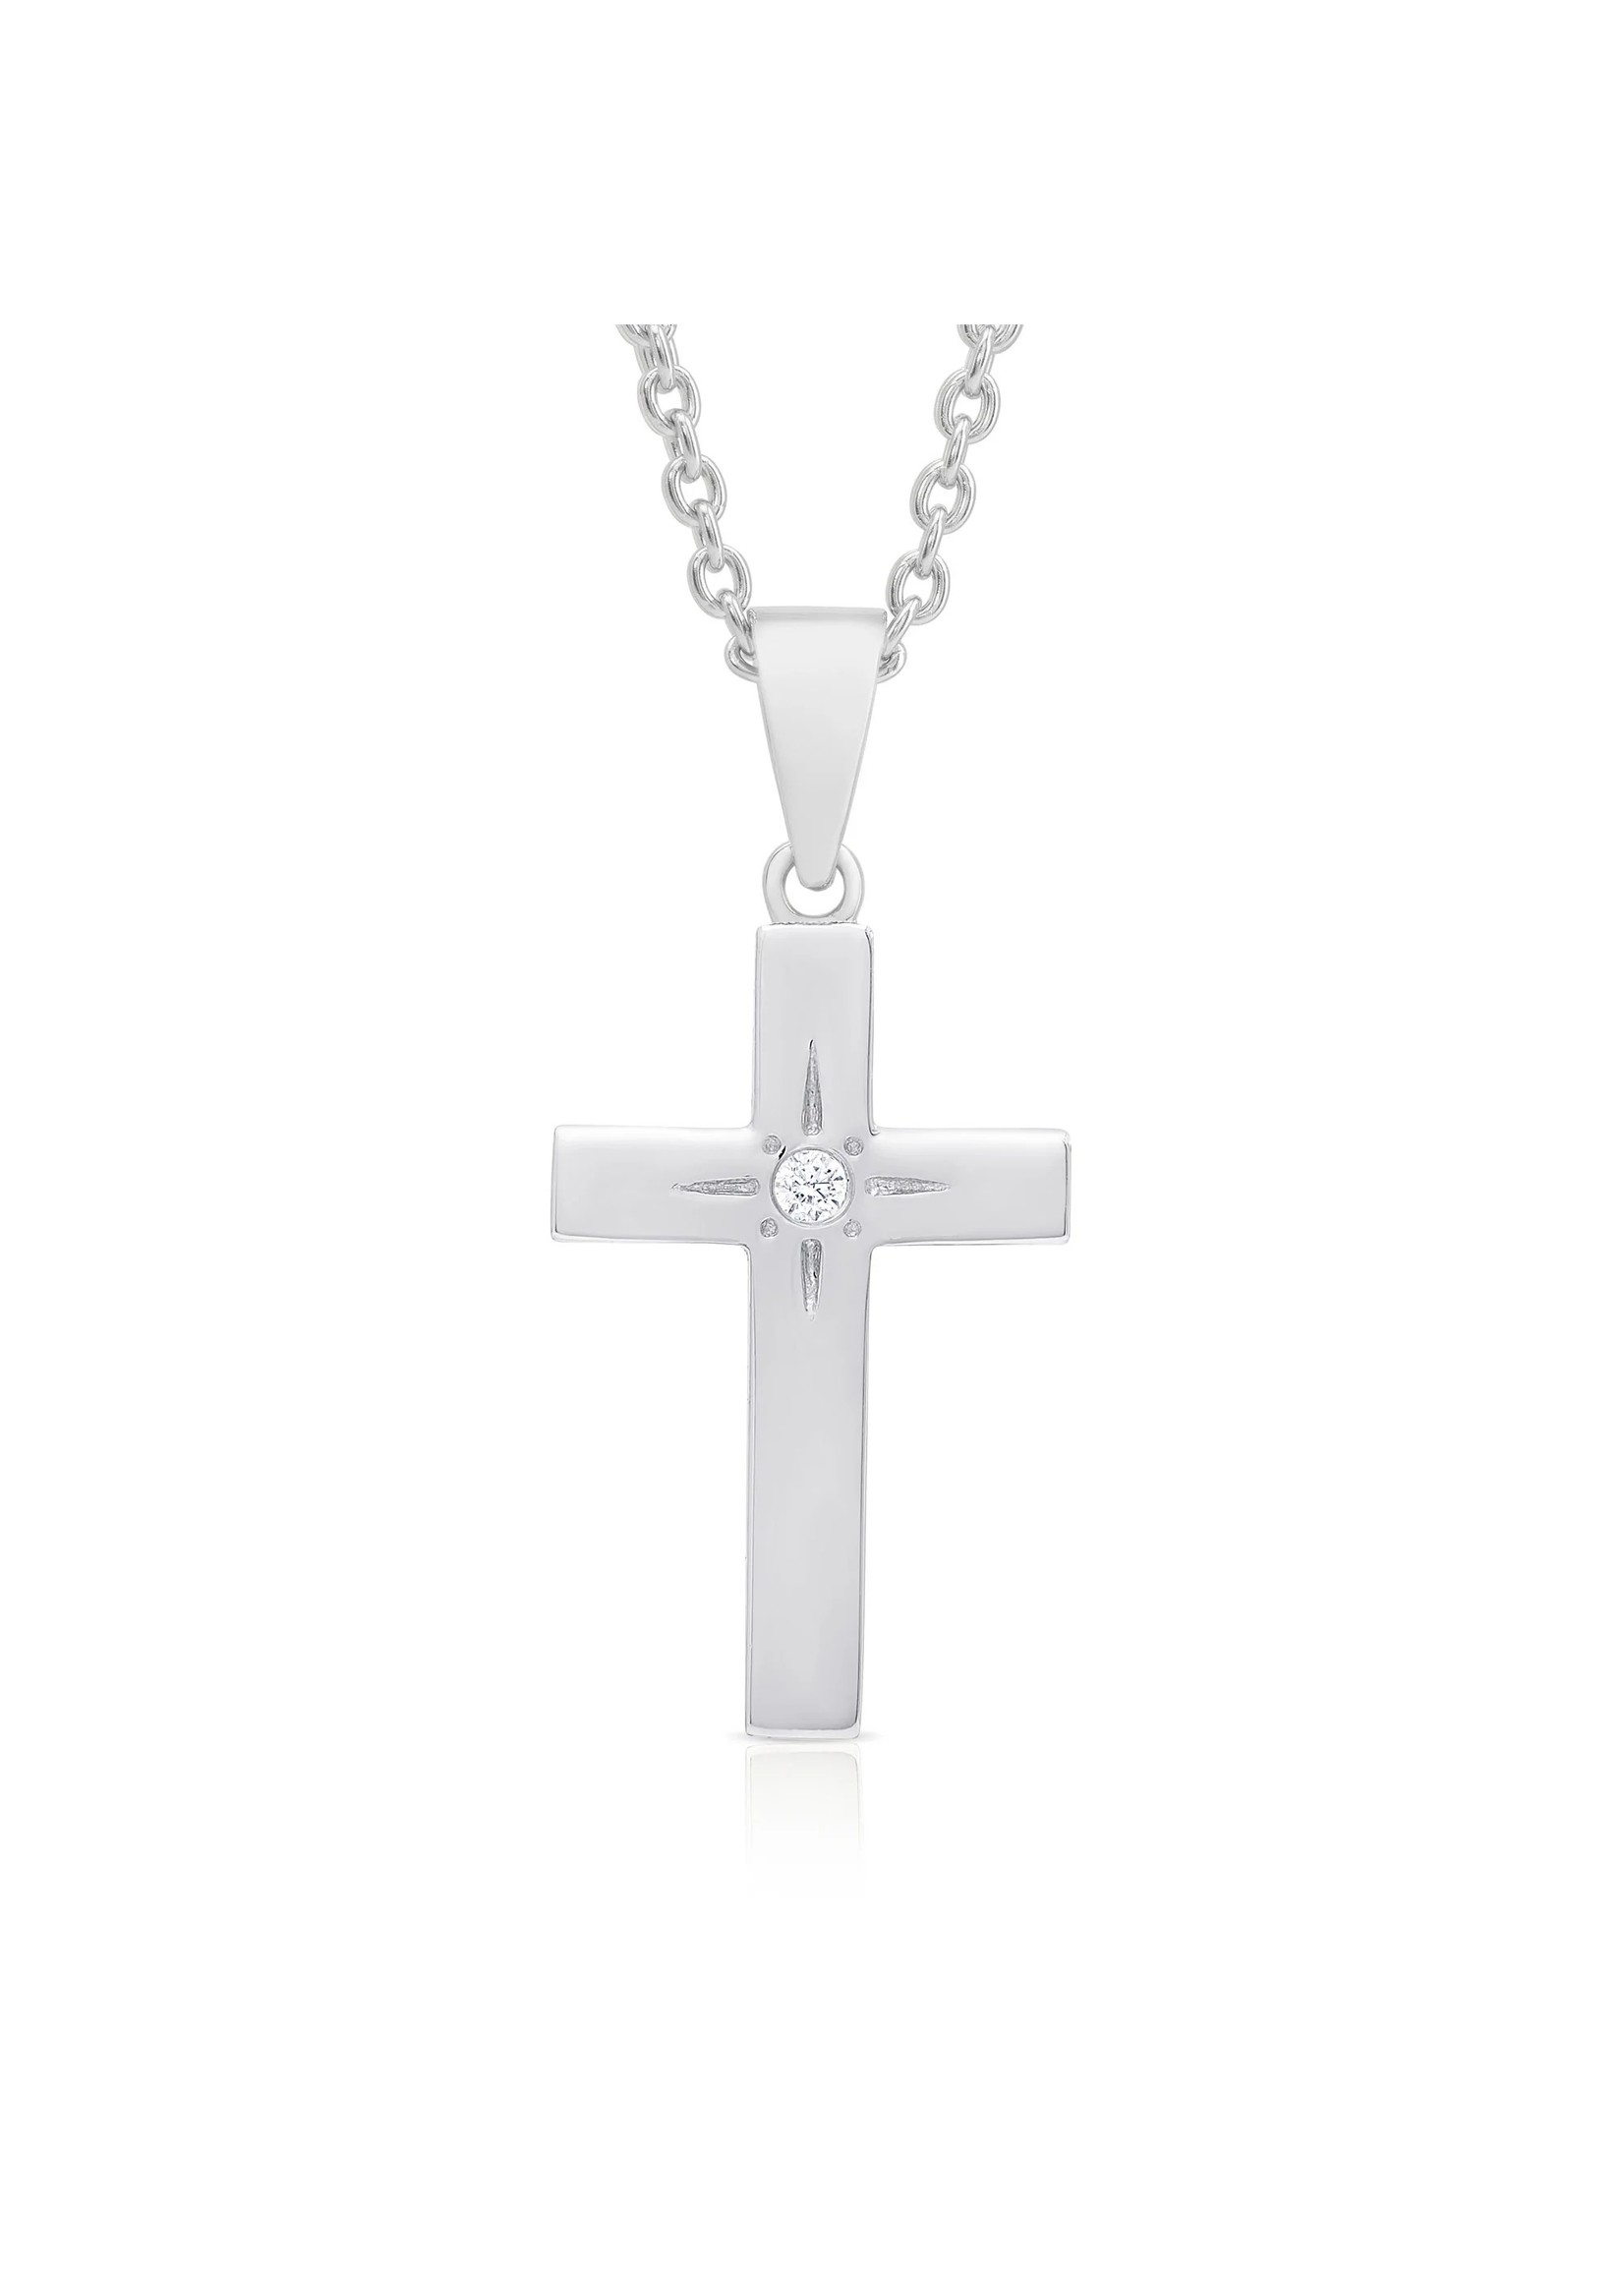 Lily Nily Silver Cross Necklace